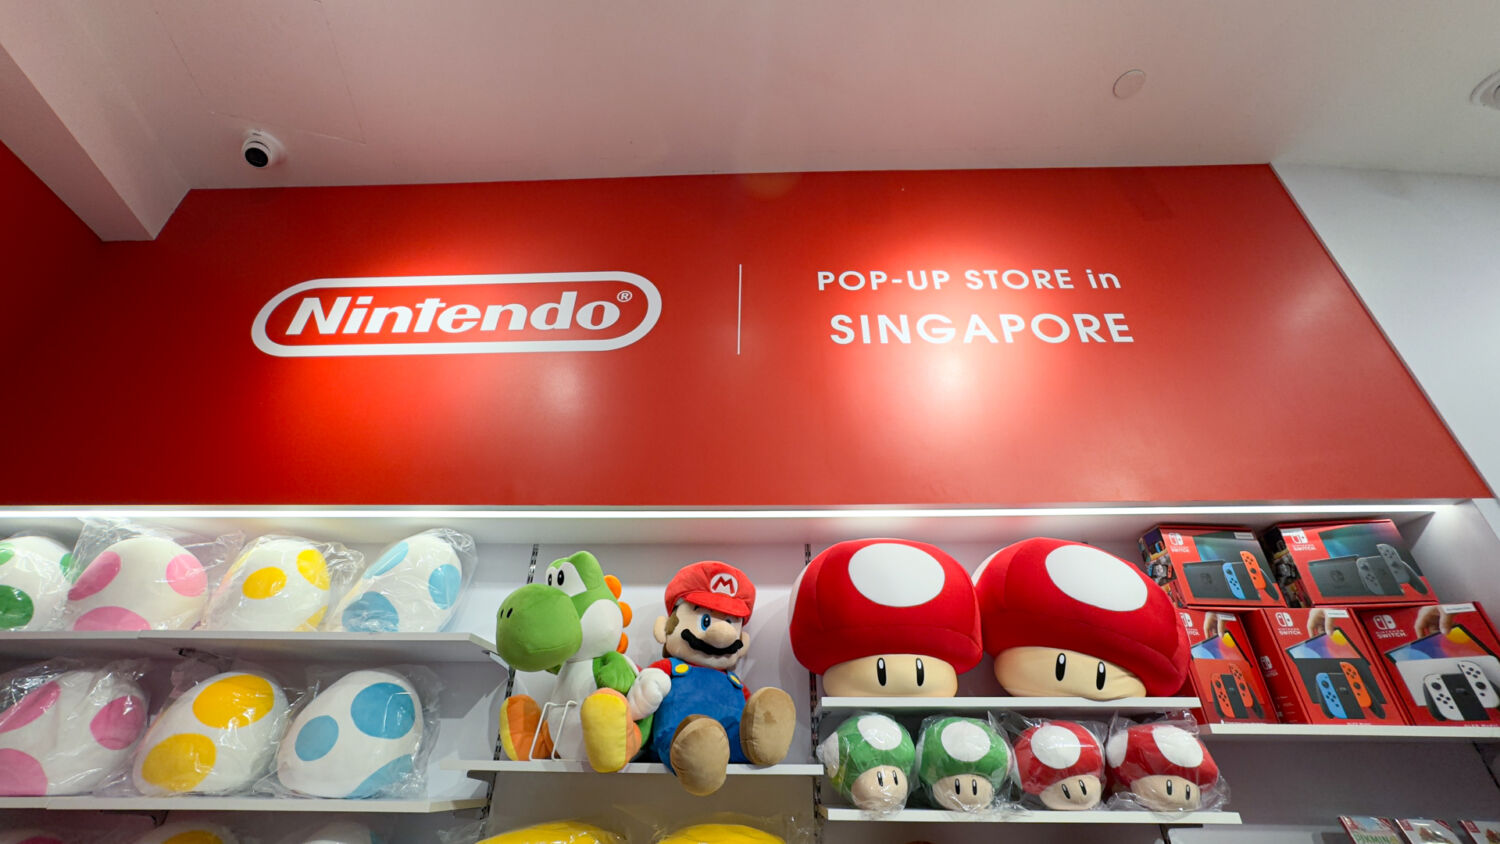 In Pictures: Nintendo Pop-up Store in Singapore 